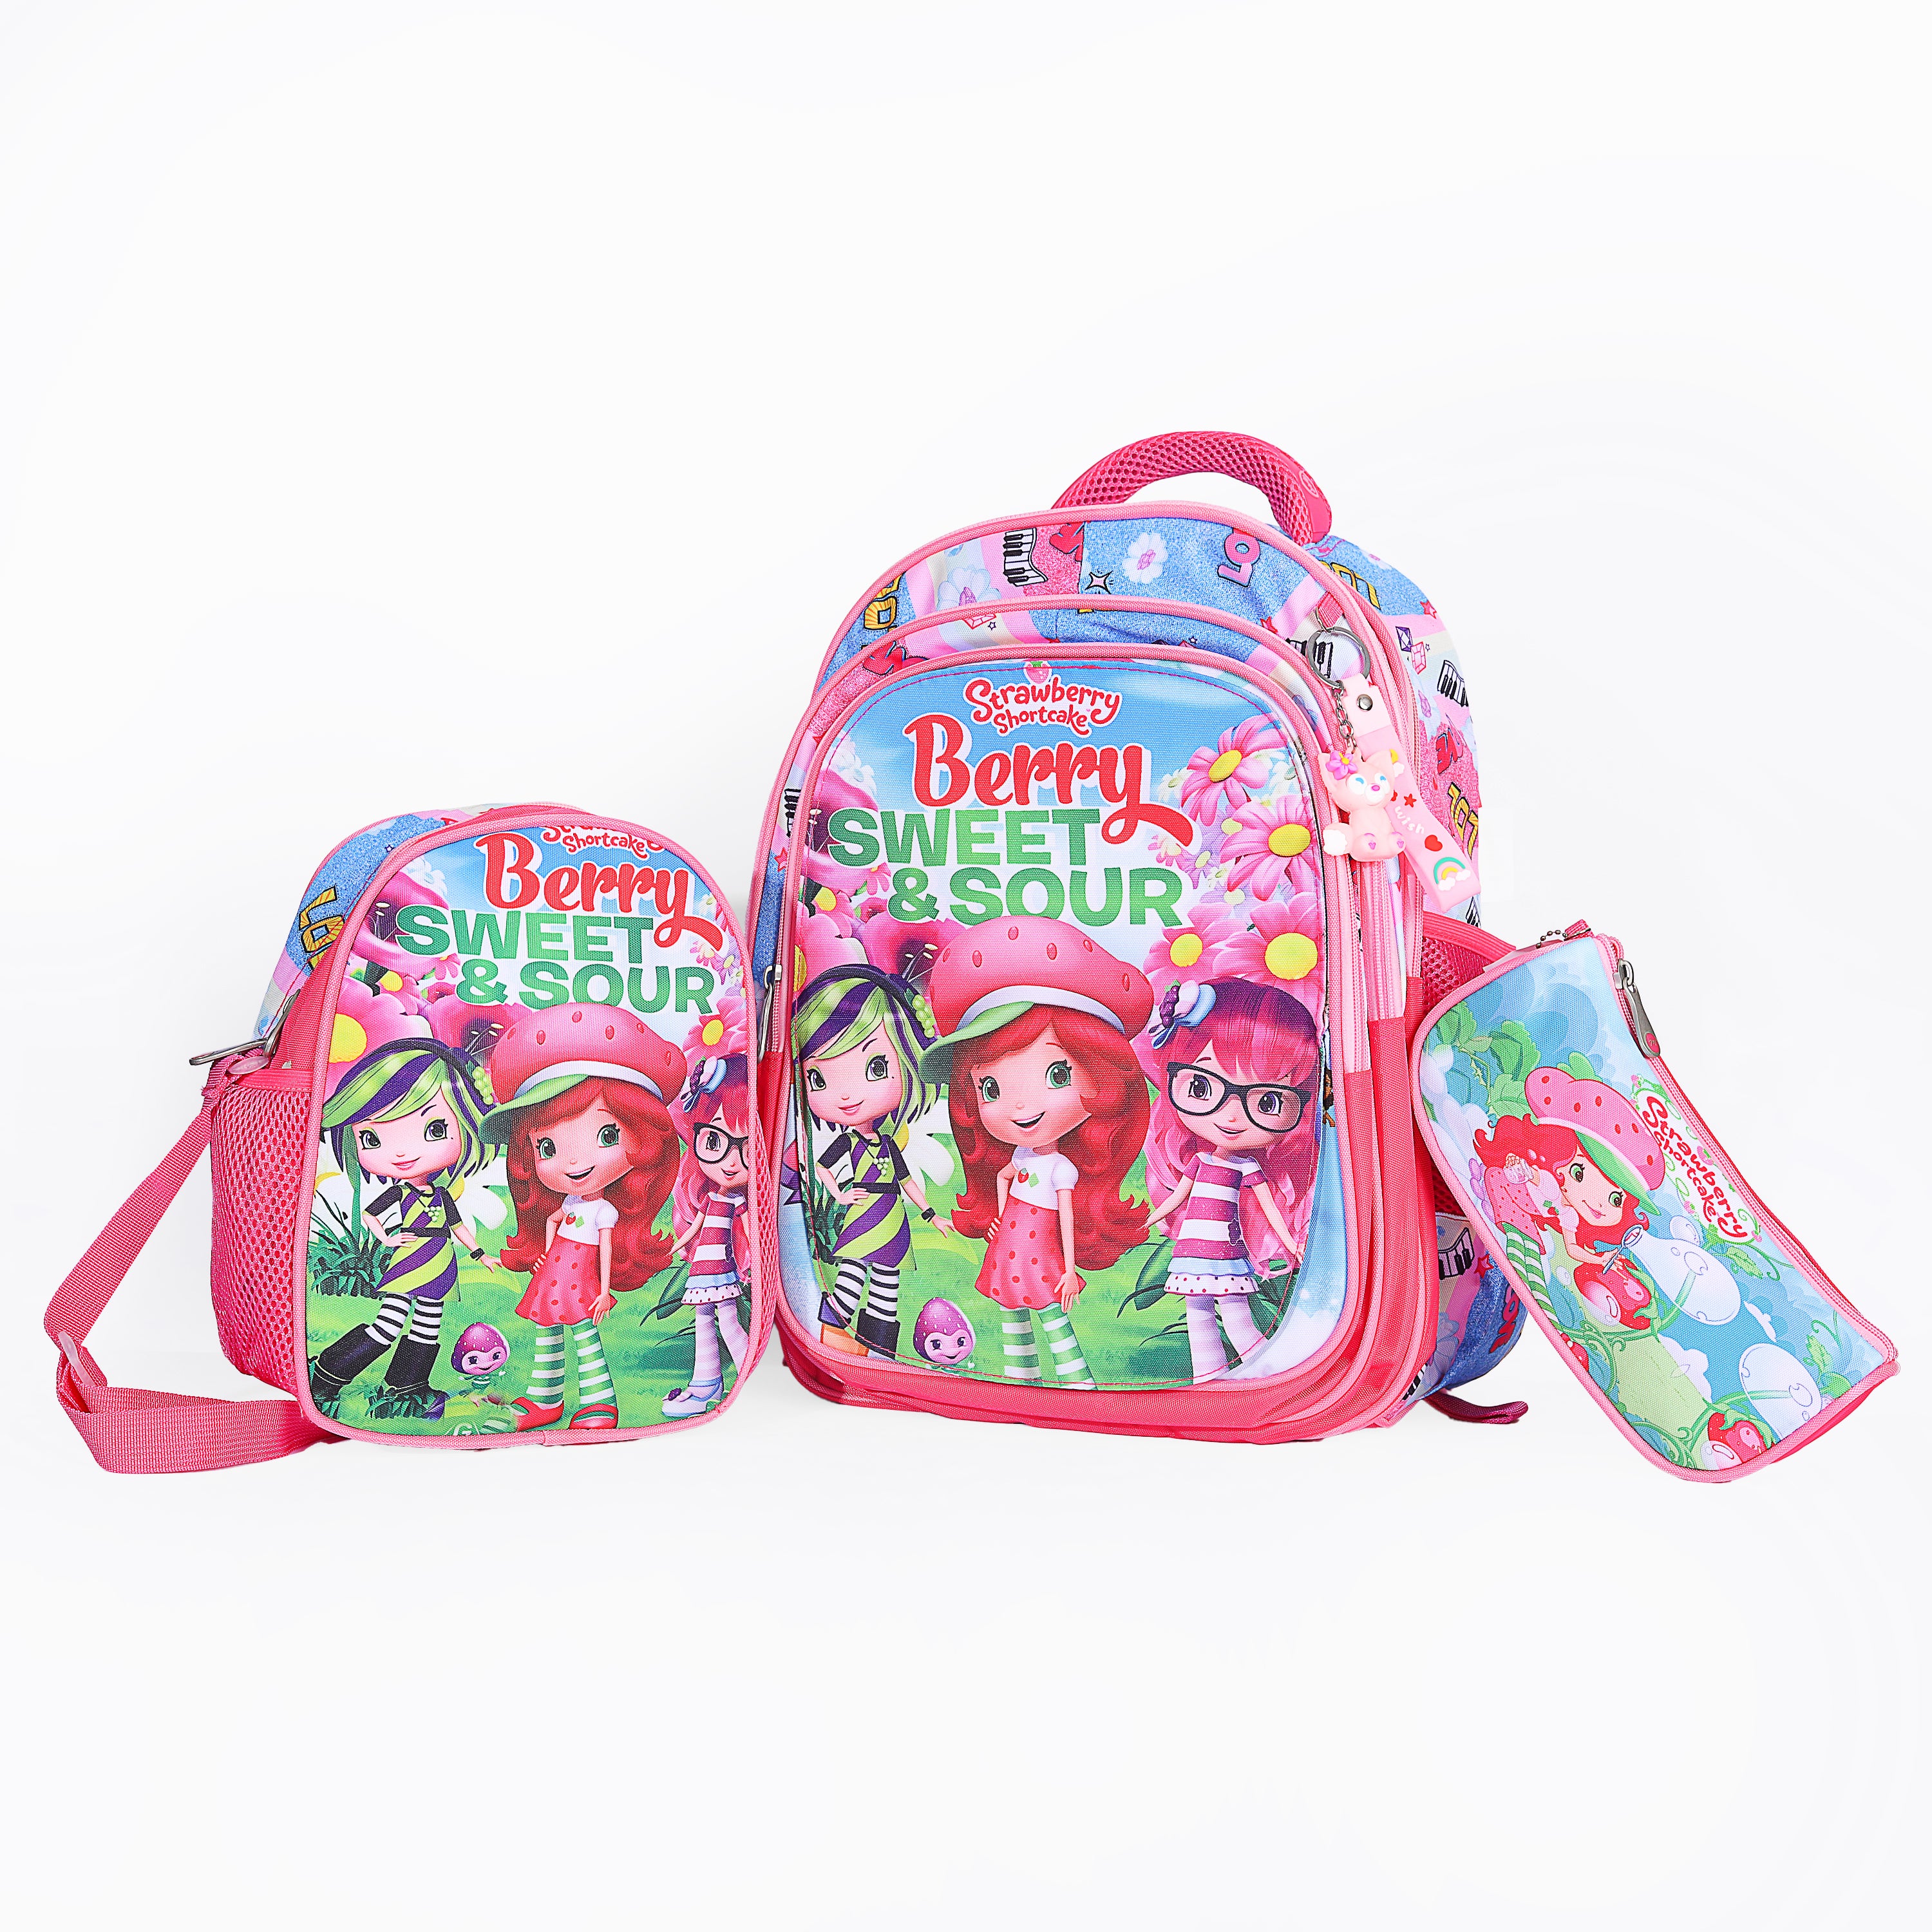 Multi Faces LOL Surprise Bag For Girls 16 INCH